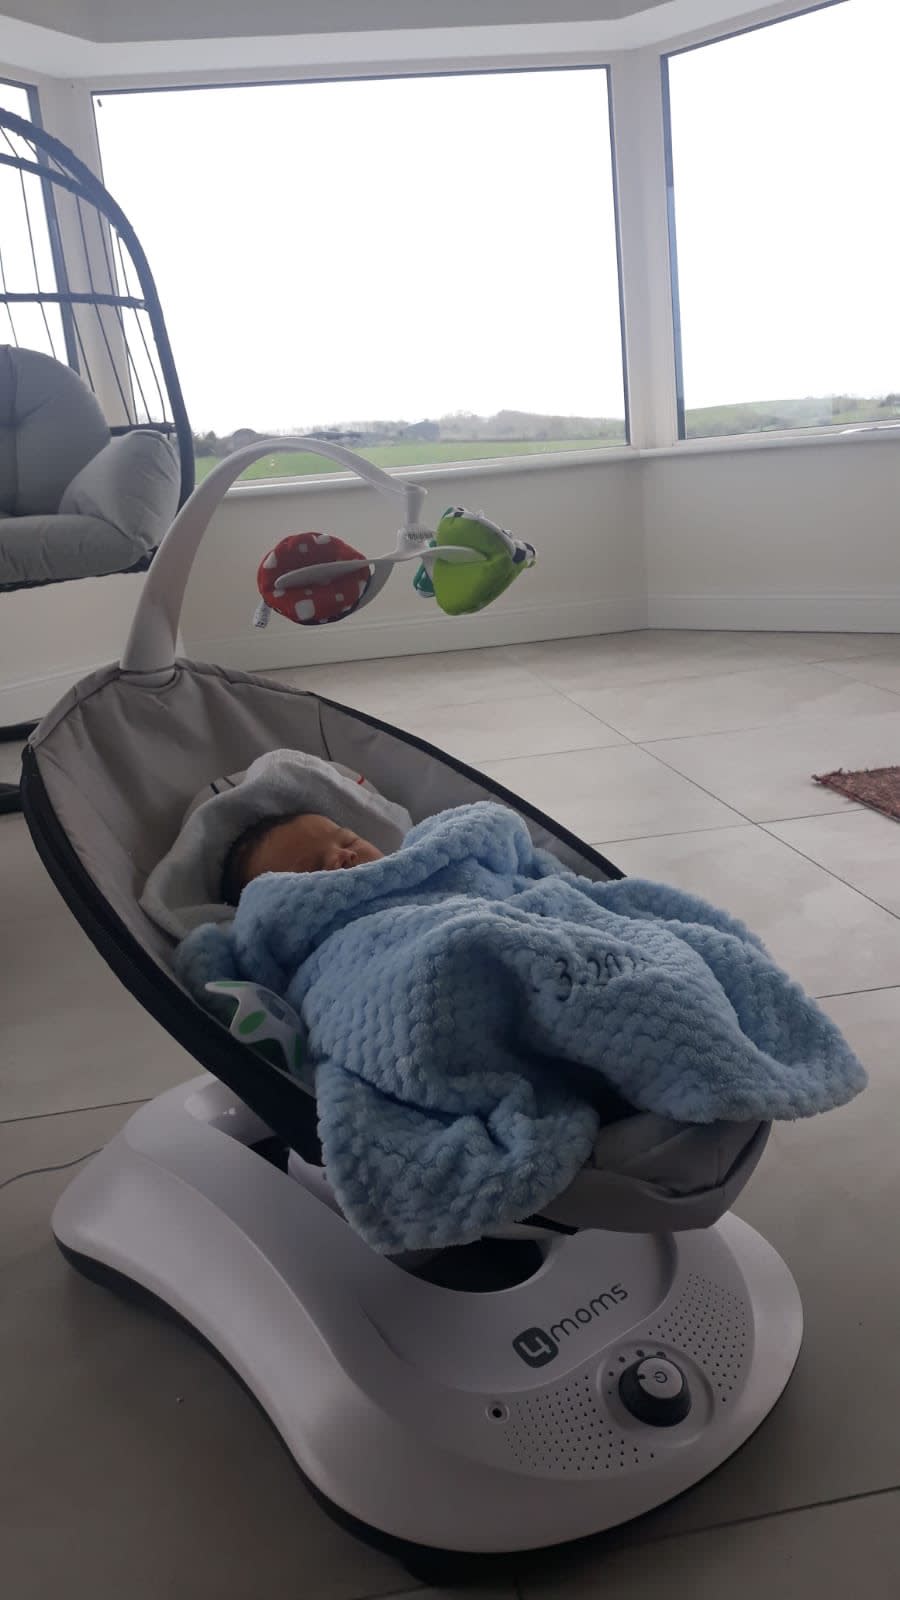 Baby Faolán is 'doing great' says aunty Emma. Photo: Twitter/emmabethgall.